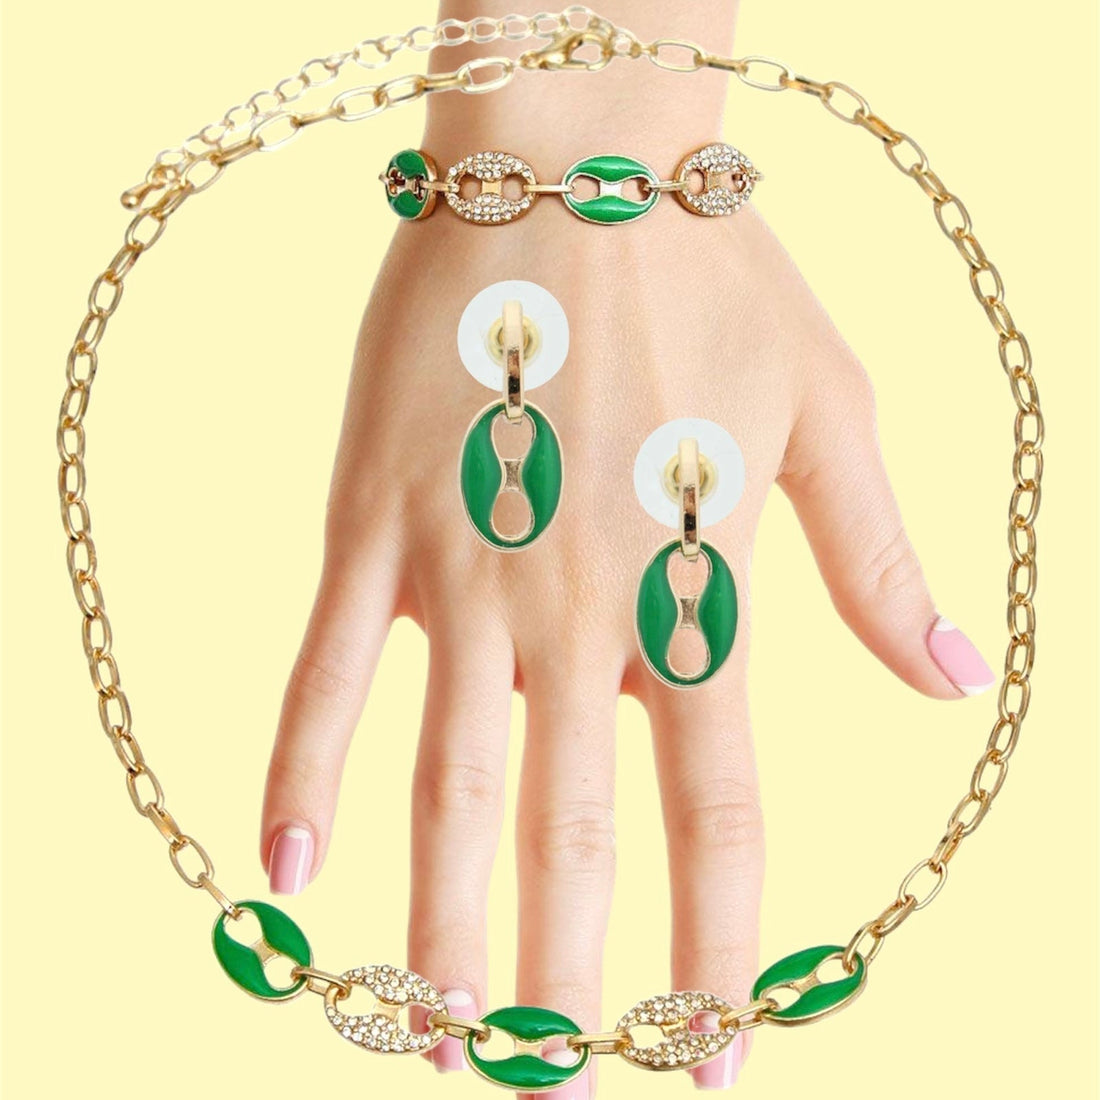 Eye-Catching Matelot Jewelry: Must-Have Bracelets, Earrings, Necklaces